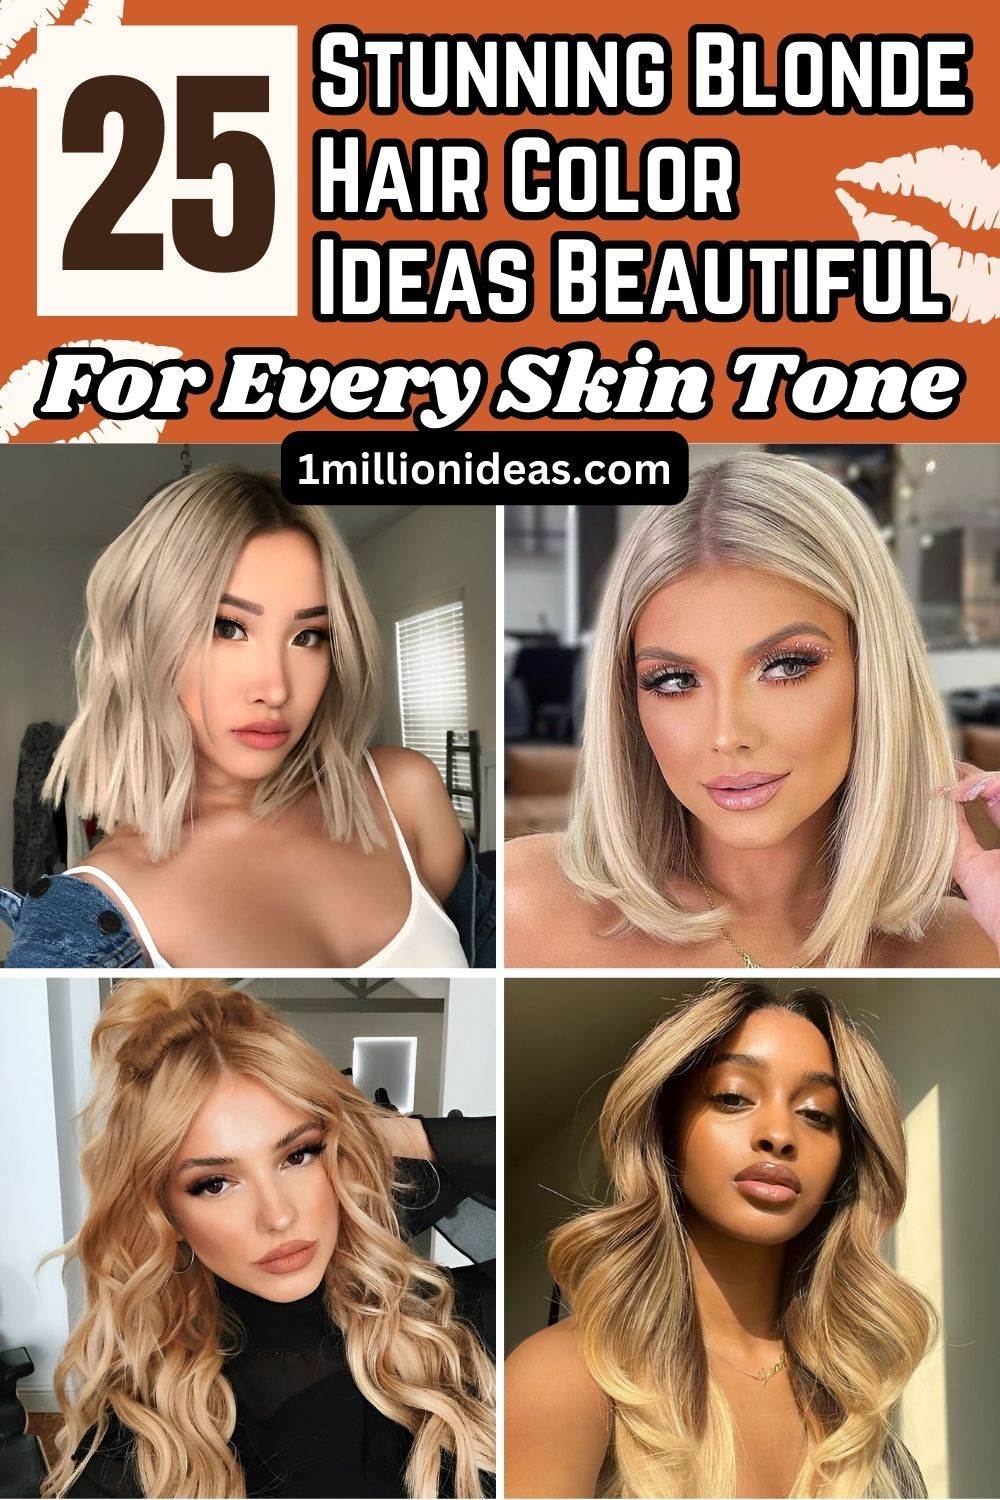 25 Stunning Blonde Hair Color Ideas Beautiful For Every Skin Tone - 161